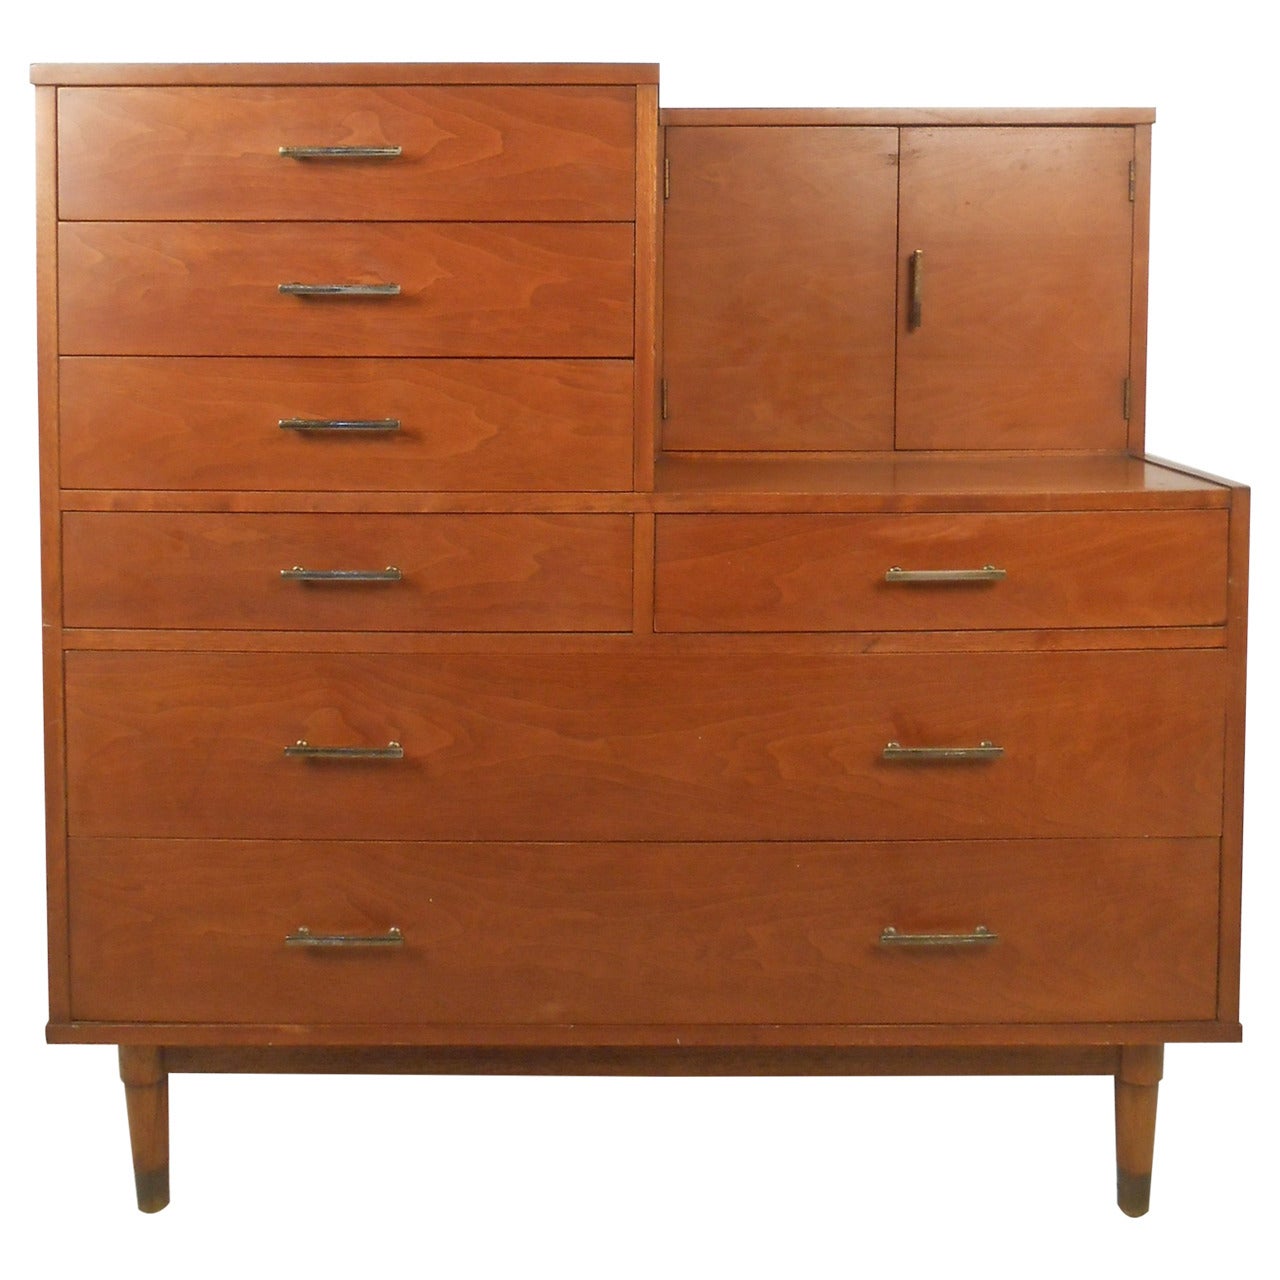 Tall Mid-Century Bedroom Dresser with Vanity by Drexel